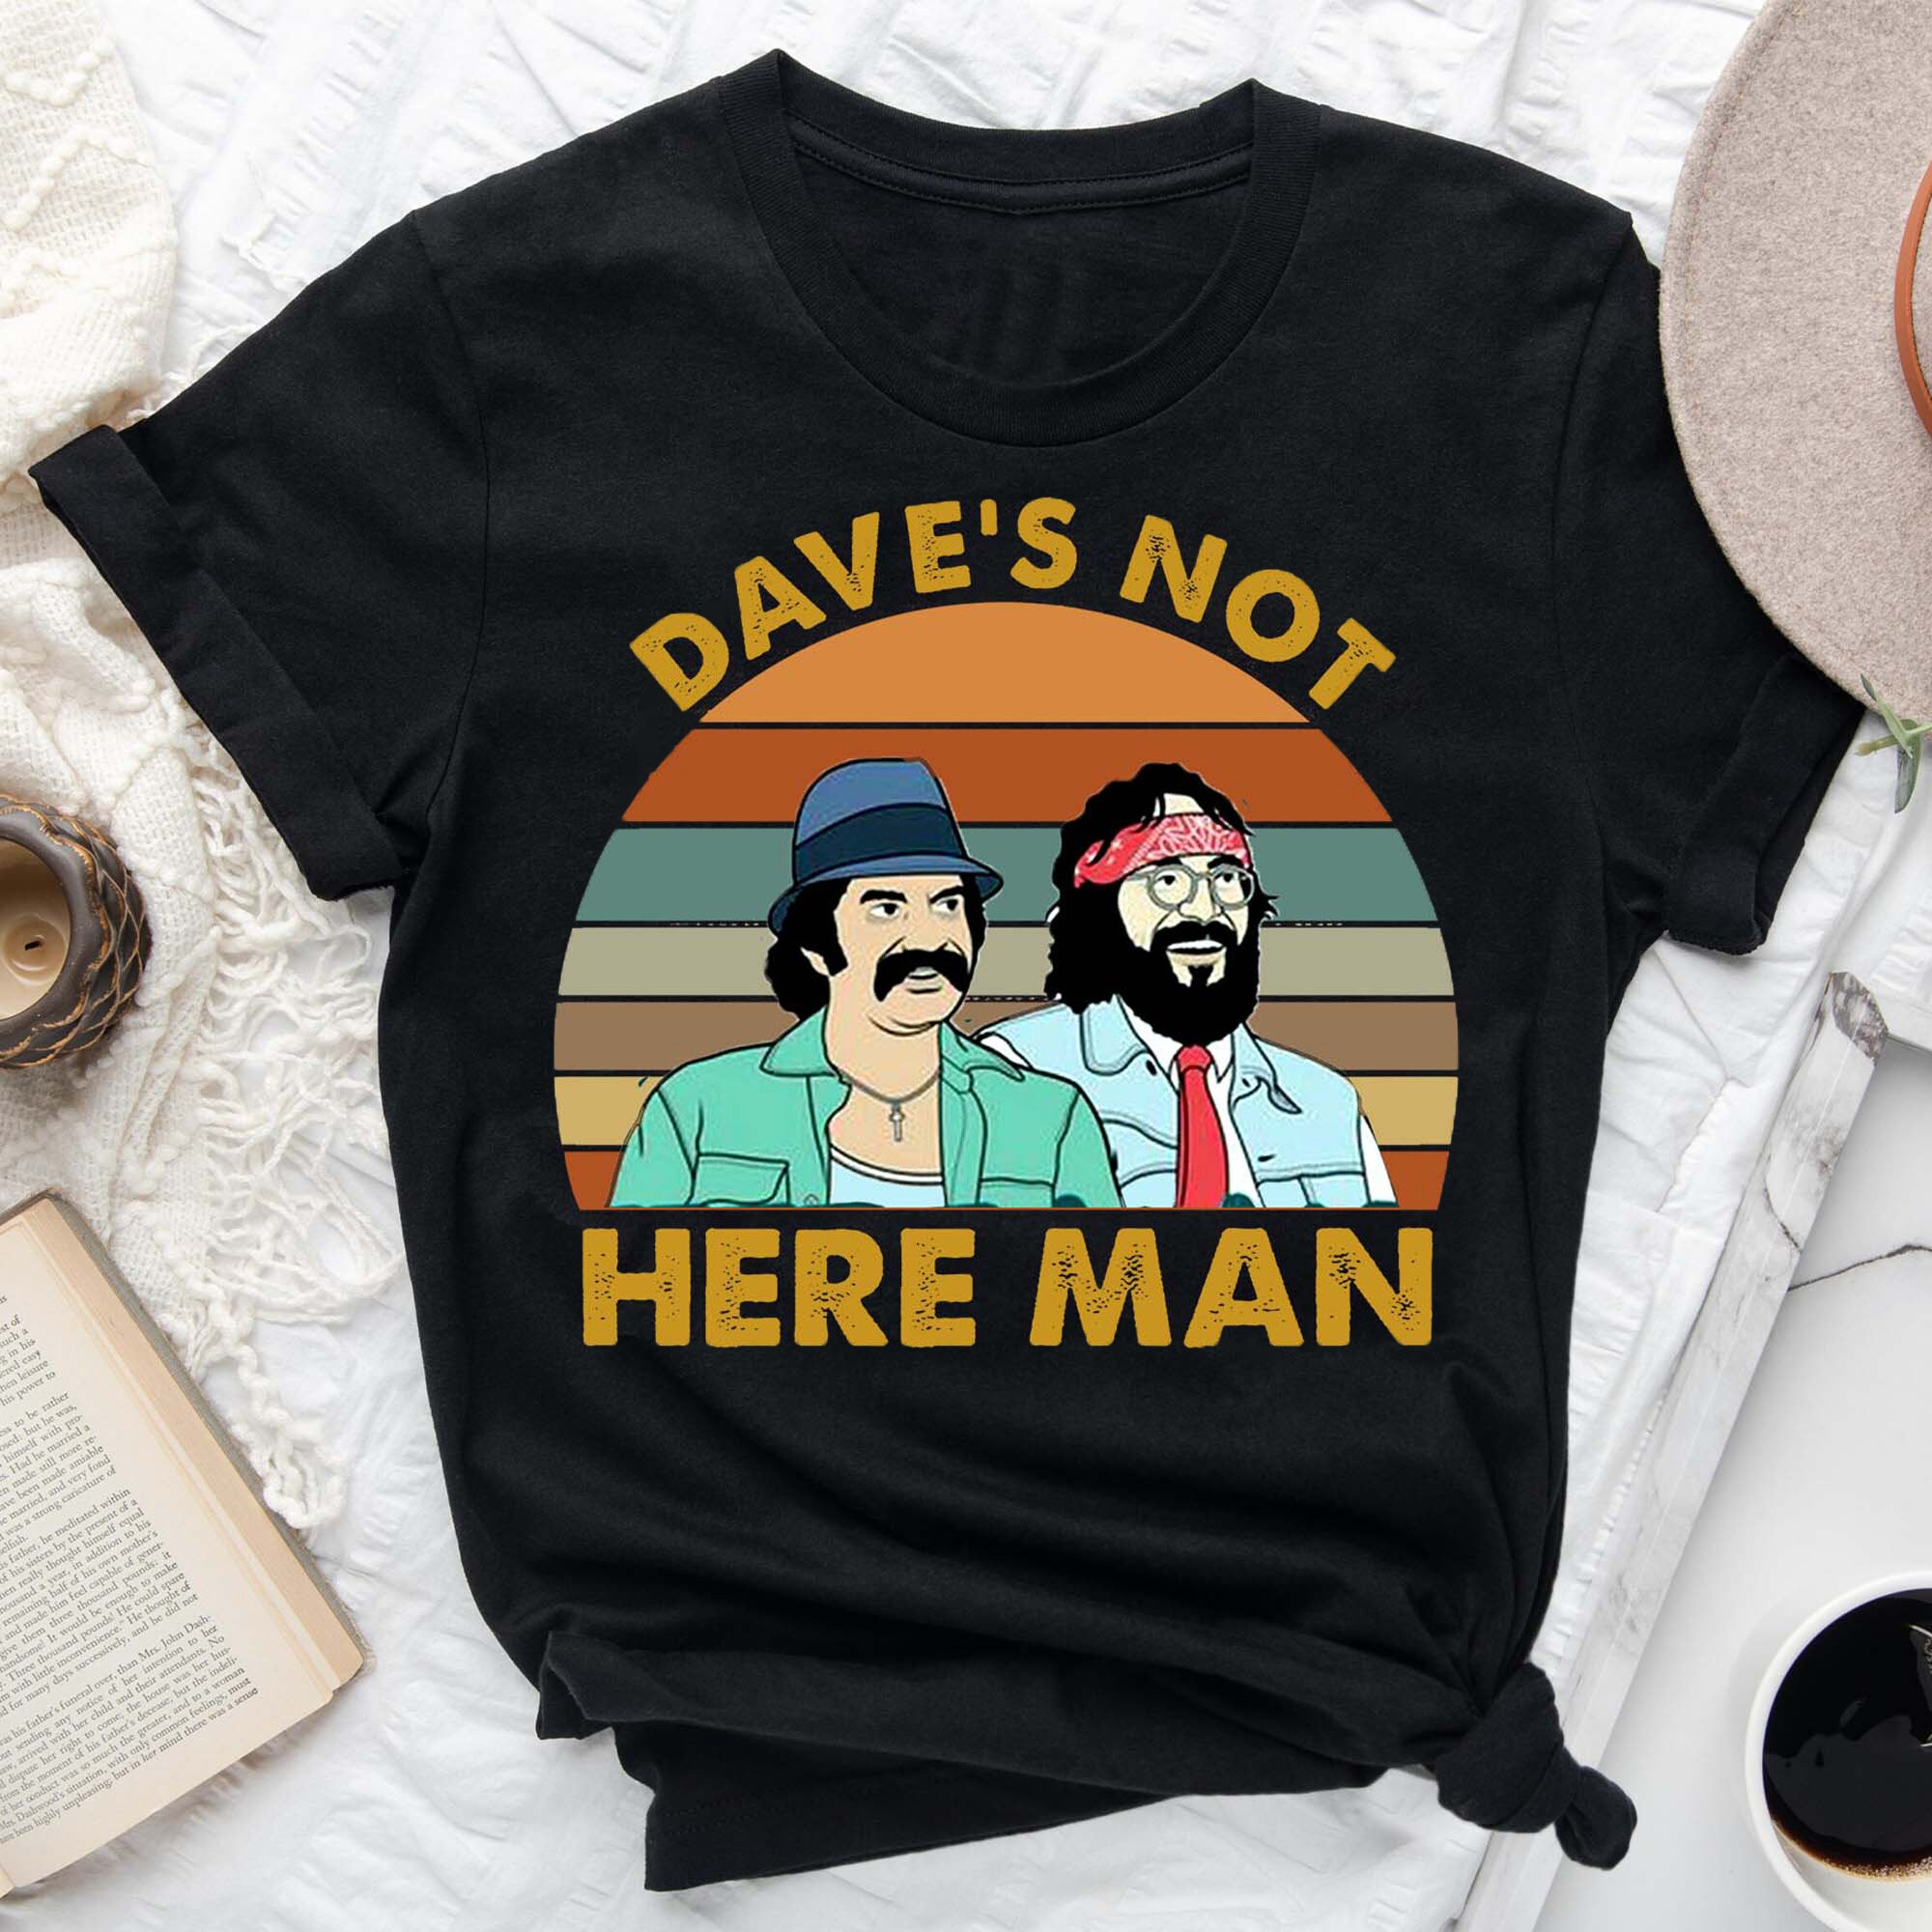 Daves Not Here Man Vintage T-Shirt, Up In Smoke Movies Shirt